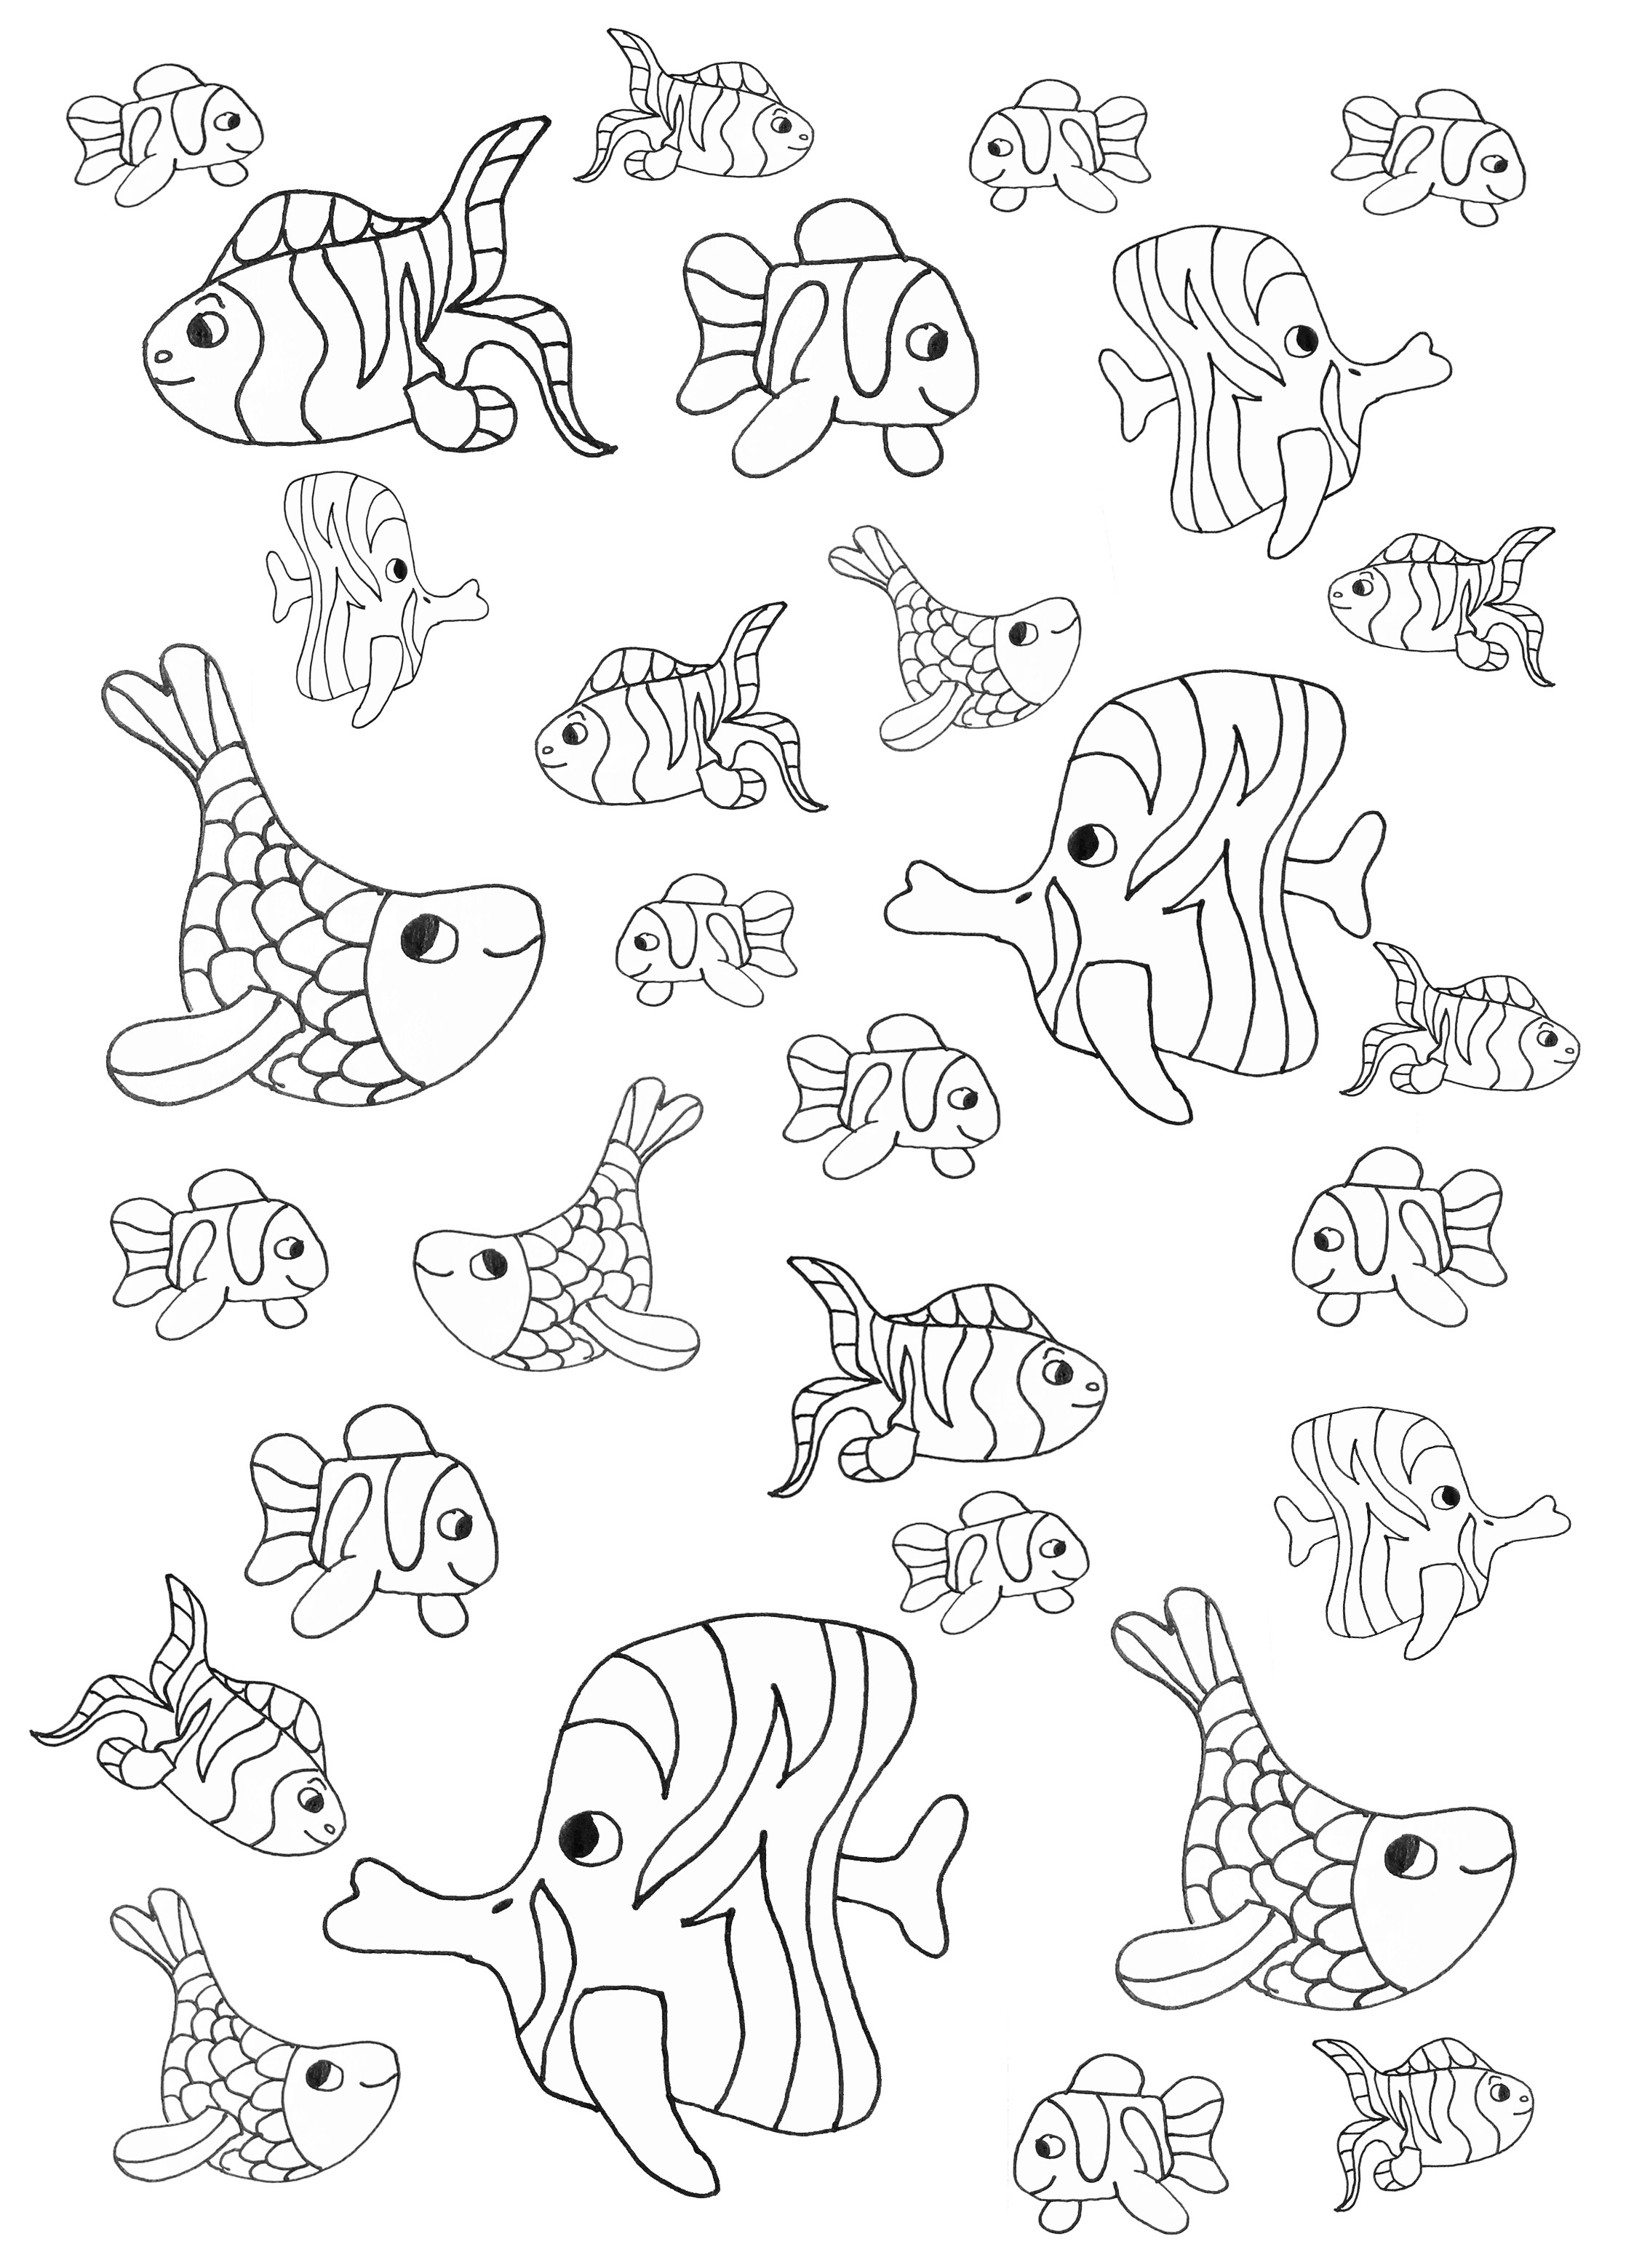 Nice coloring made of multiple fish, by Olivier